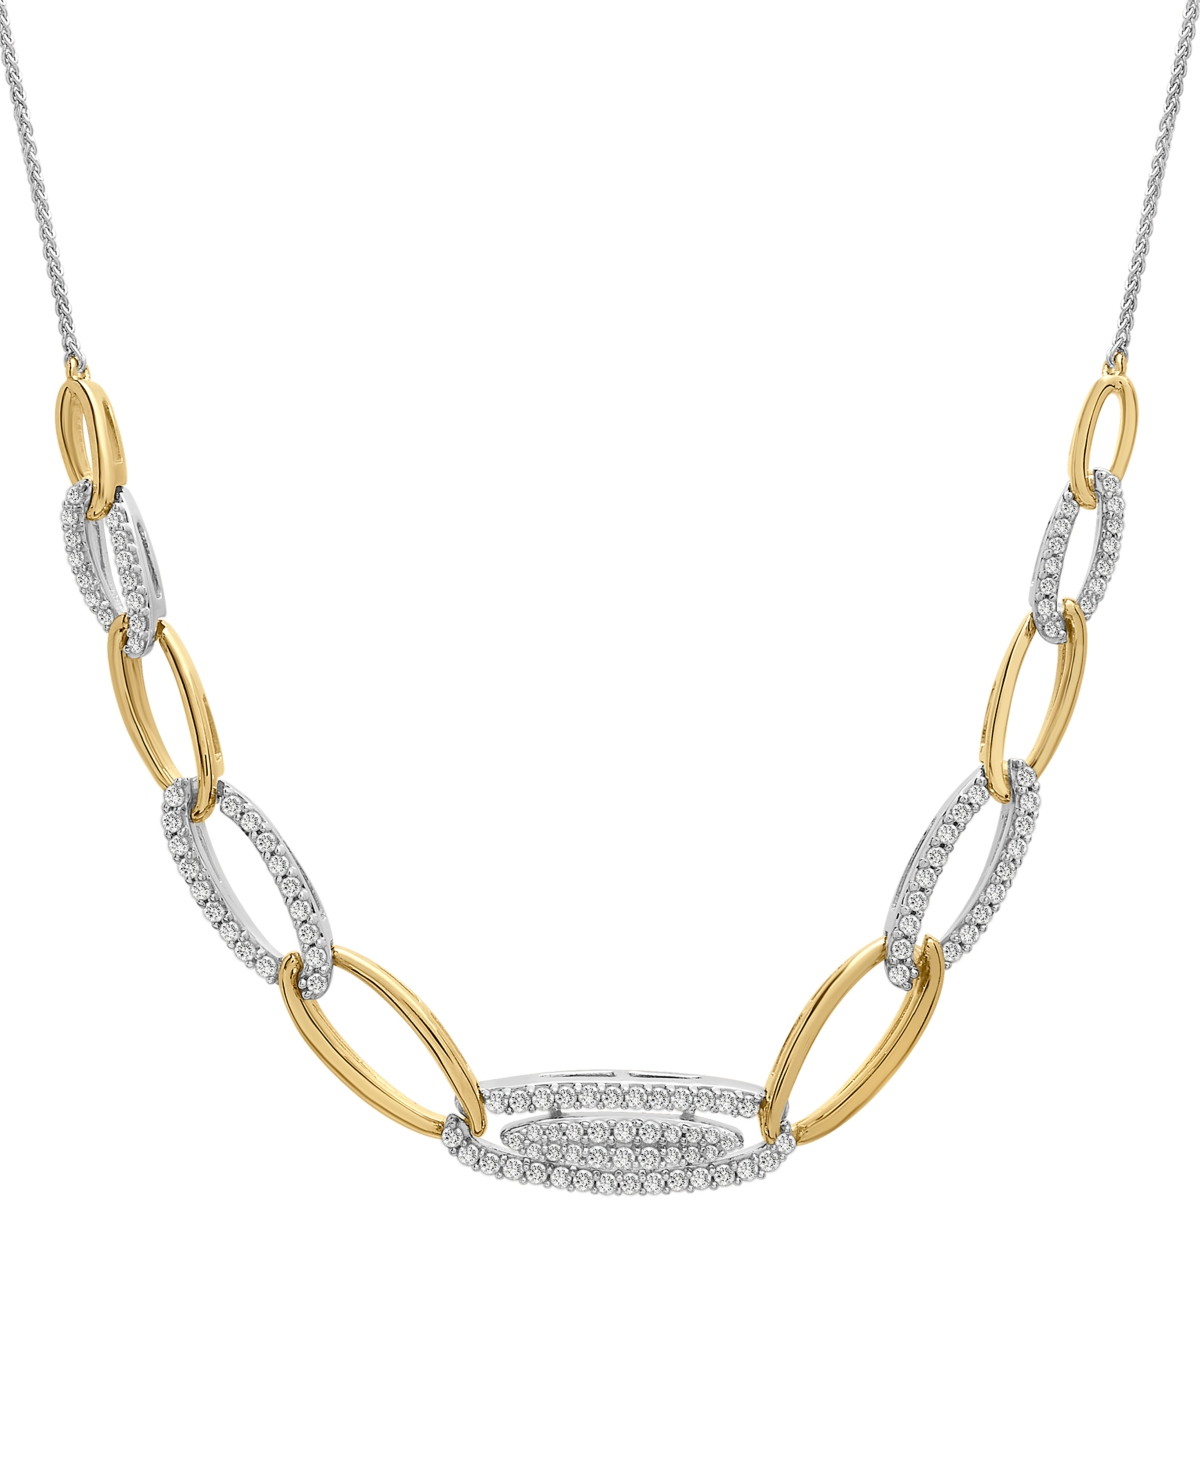 Diamond Chain Link Statement Necklace (1 ct. t.w.) in Sterling Silver & 14k Gold-Plate, 16" + 4" extender, Created for Macy's - Sterli